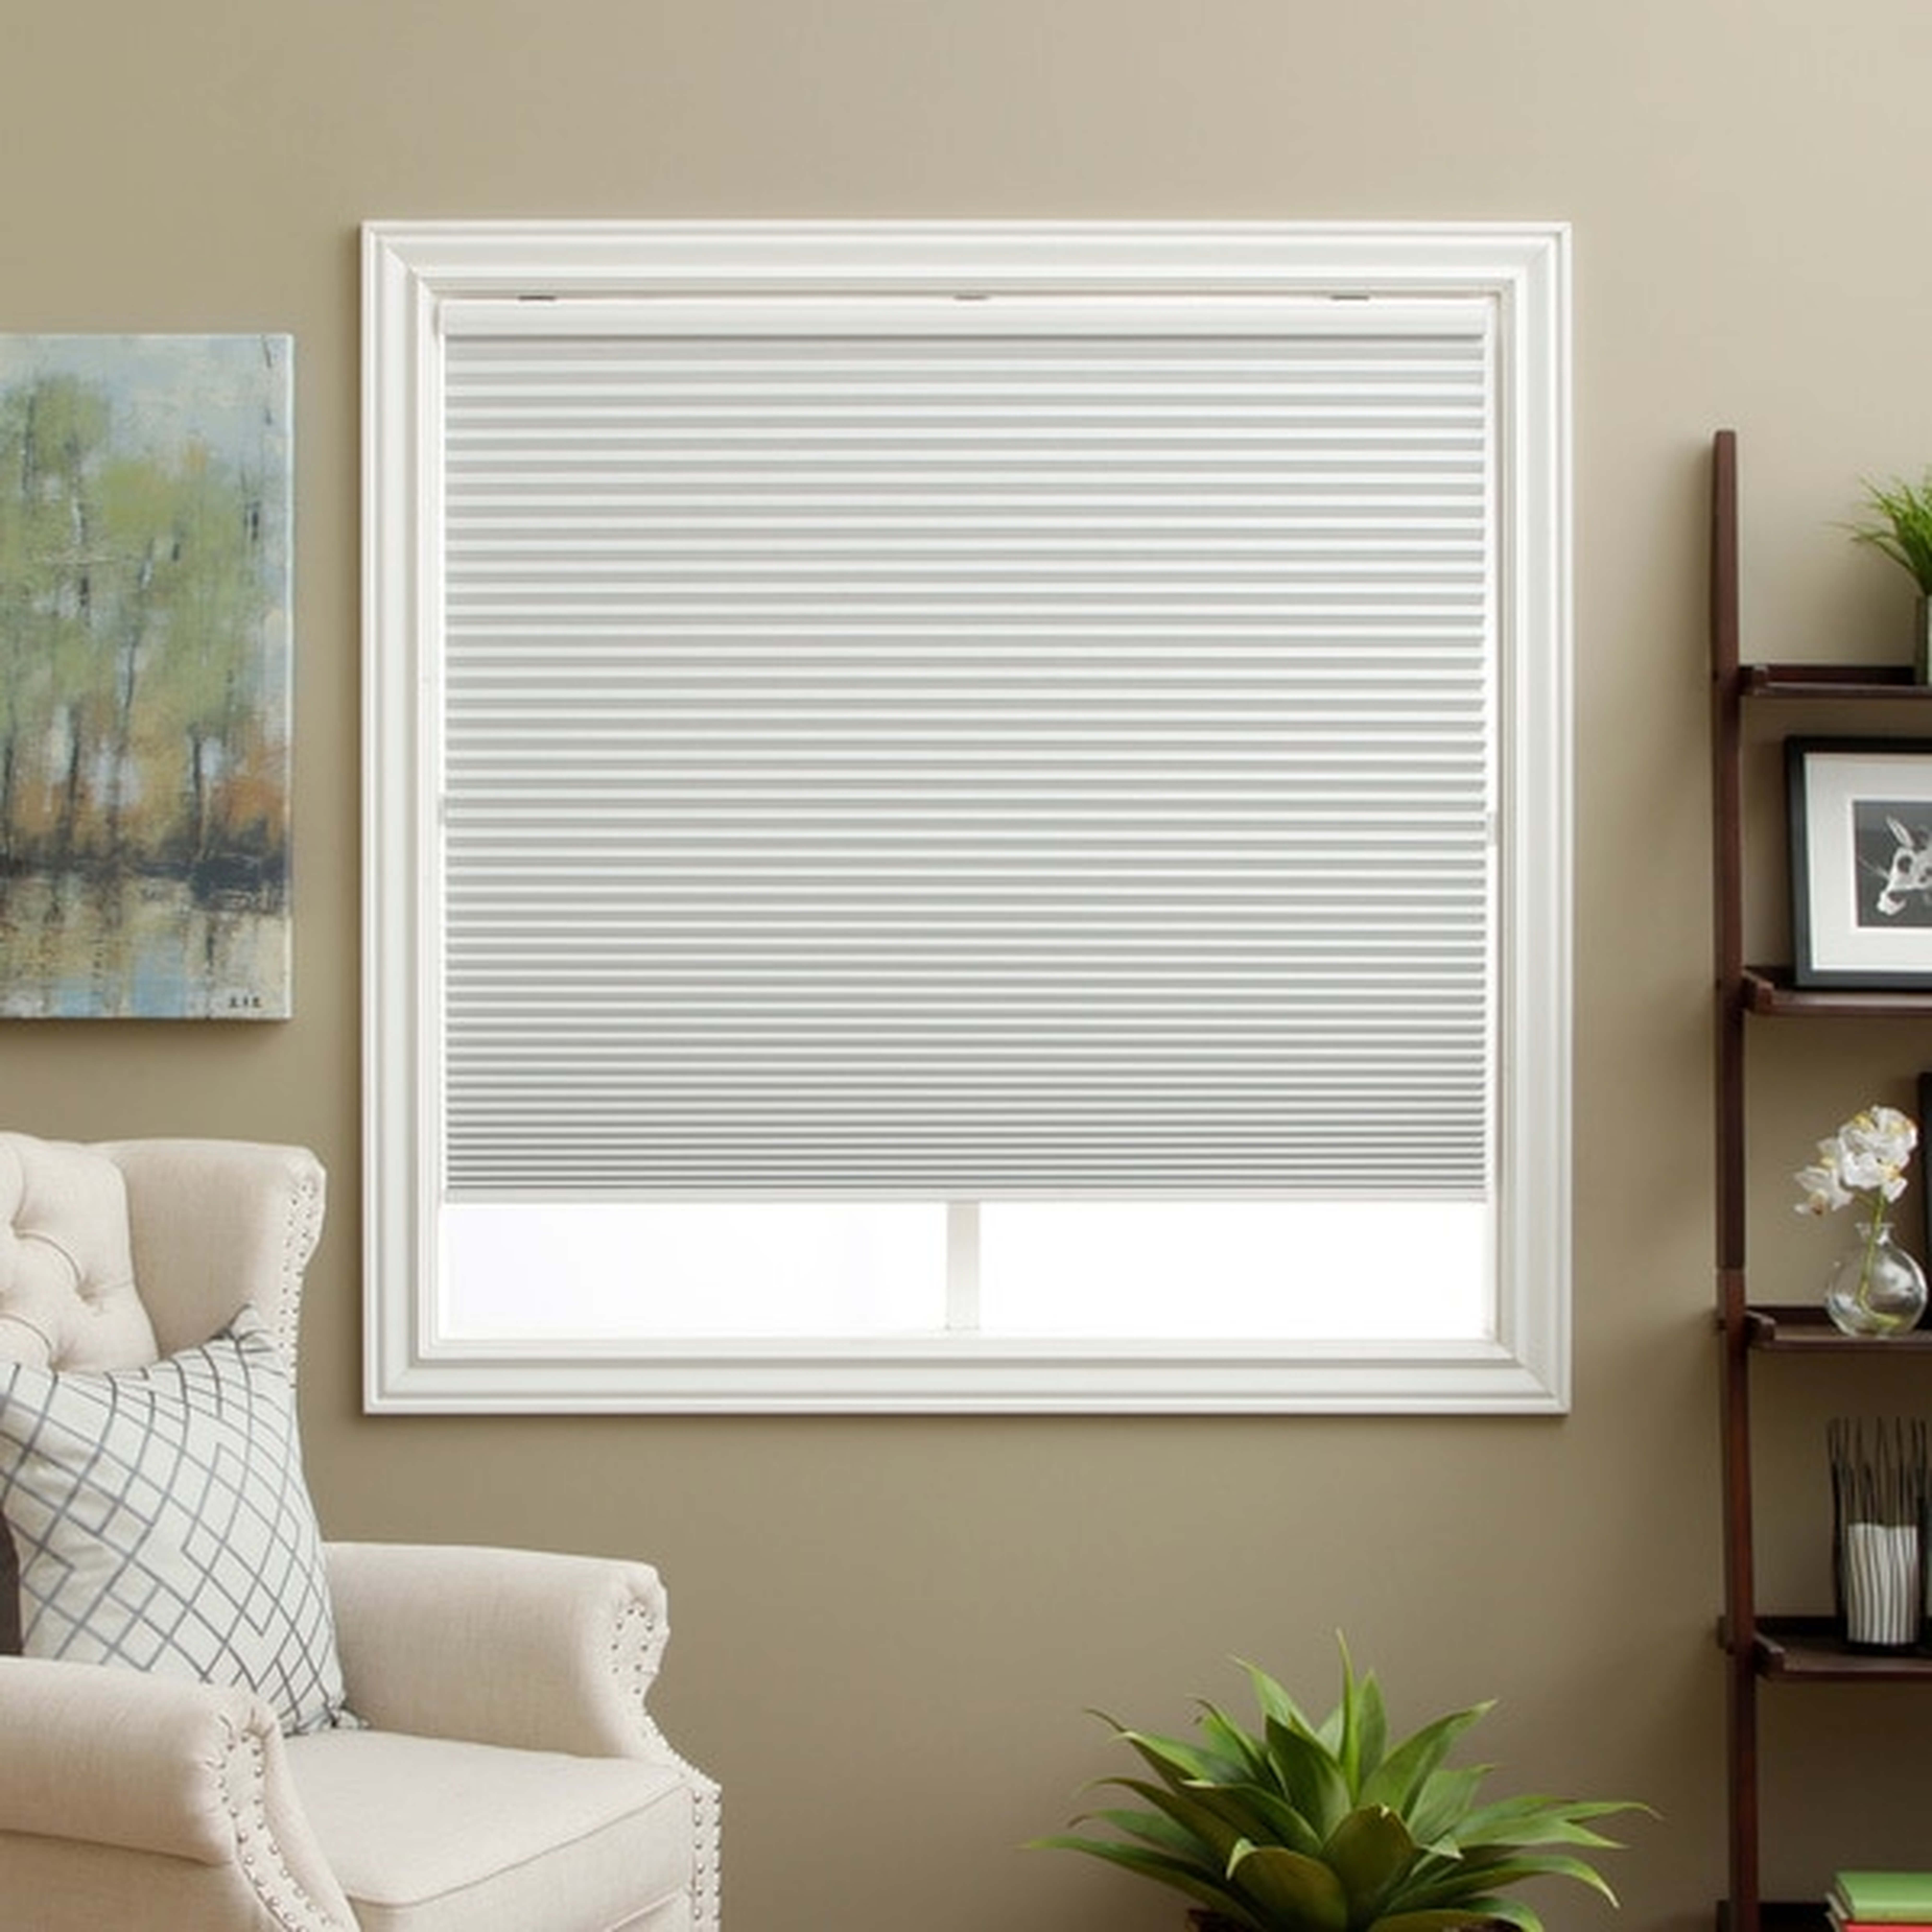 Honeycomb White Cell Blackout Cordless Cellular Shades - 40"W x 72"L - Overstock